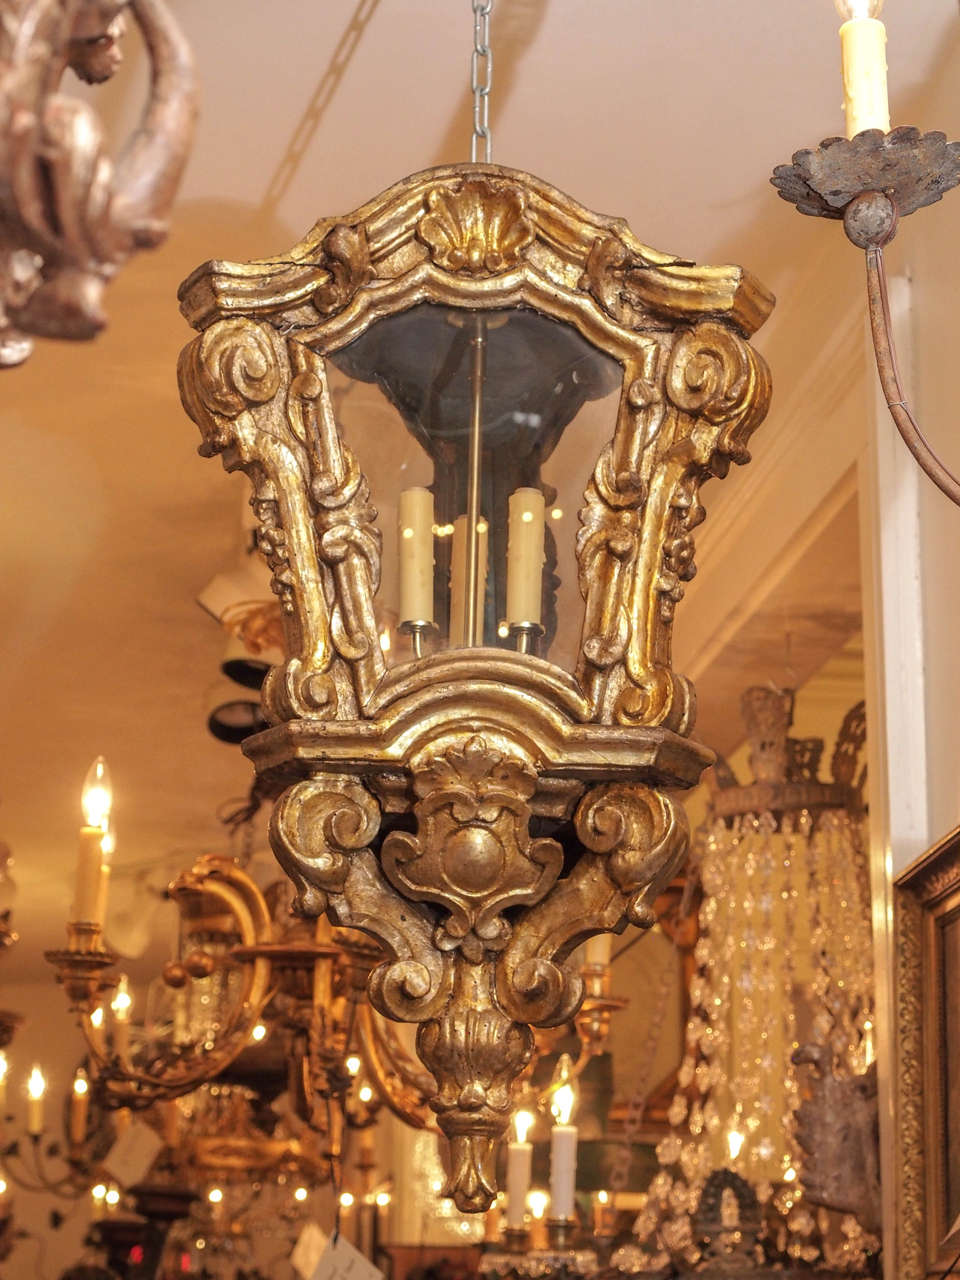 Italian Baroque giltwood lantern with three sides. One-door and glass panels. These have been wired with a trifed candle stem and come with a canopy and chain ready to hang. We recommend to have an electrician check them as wired can come loose in